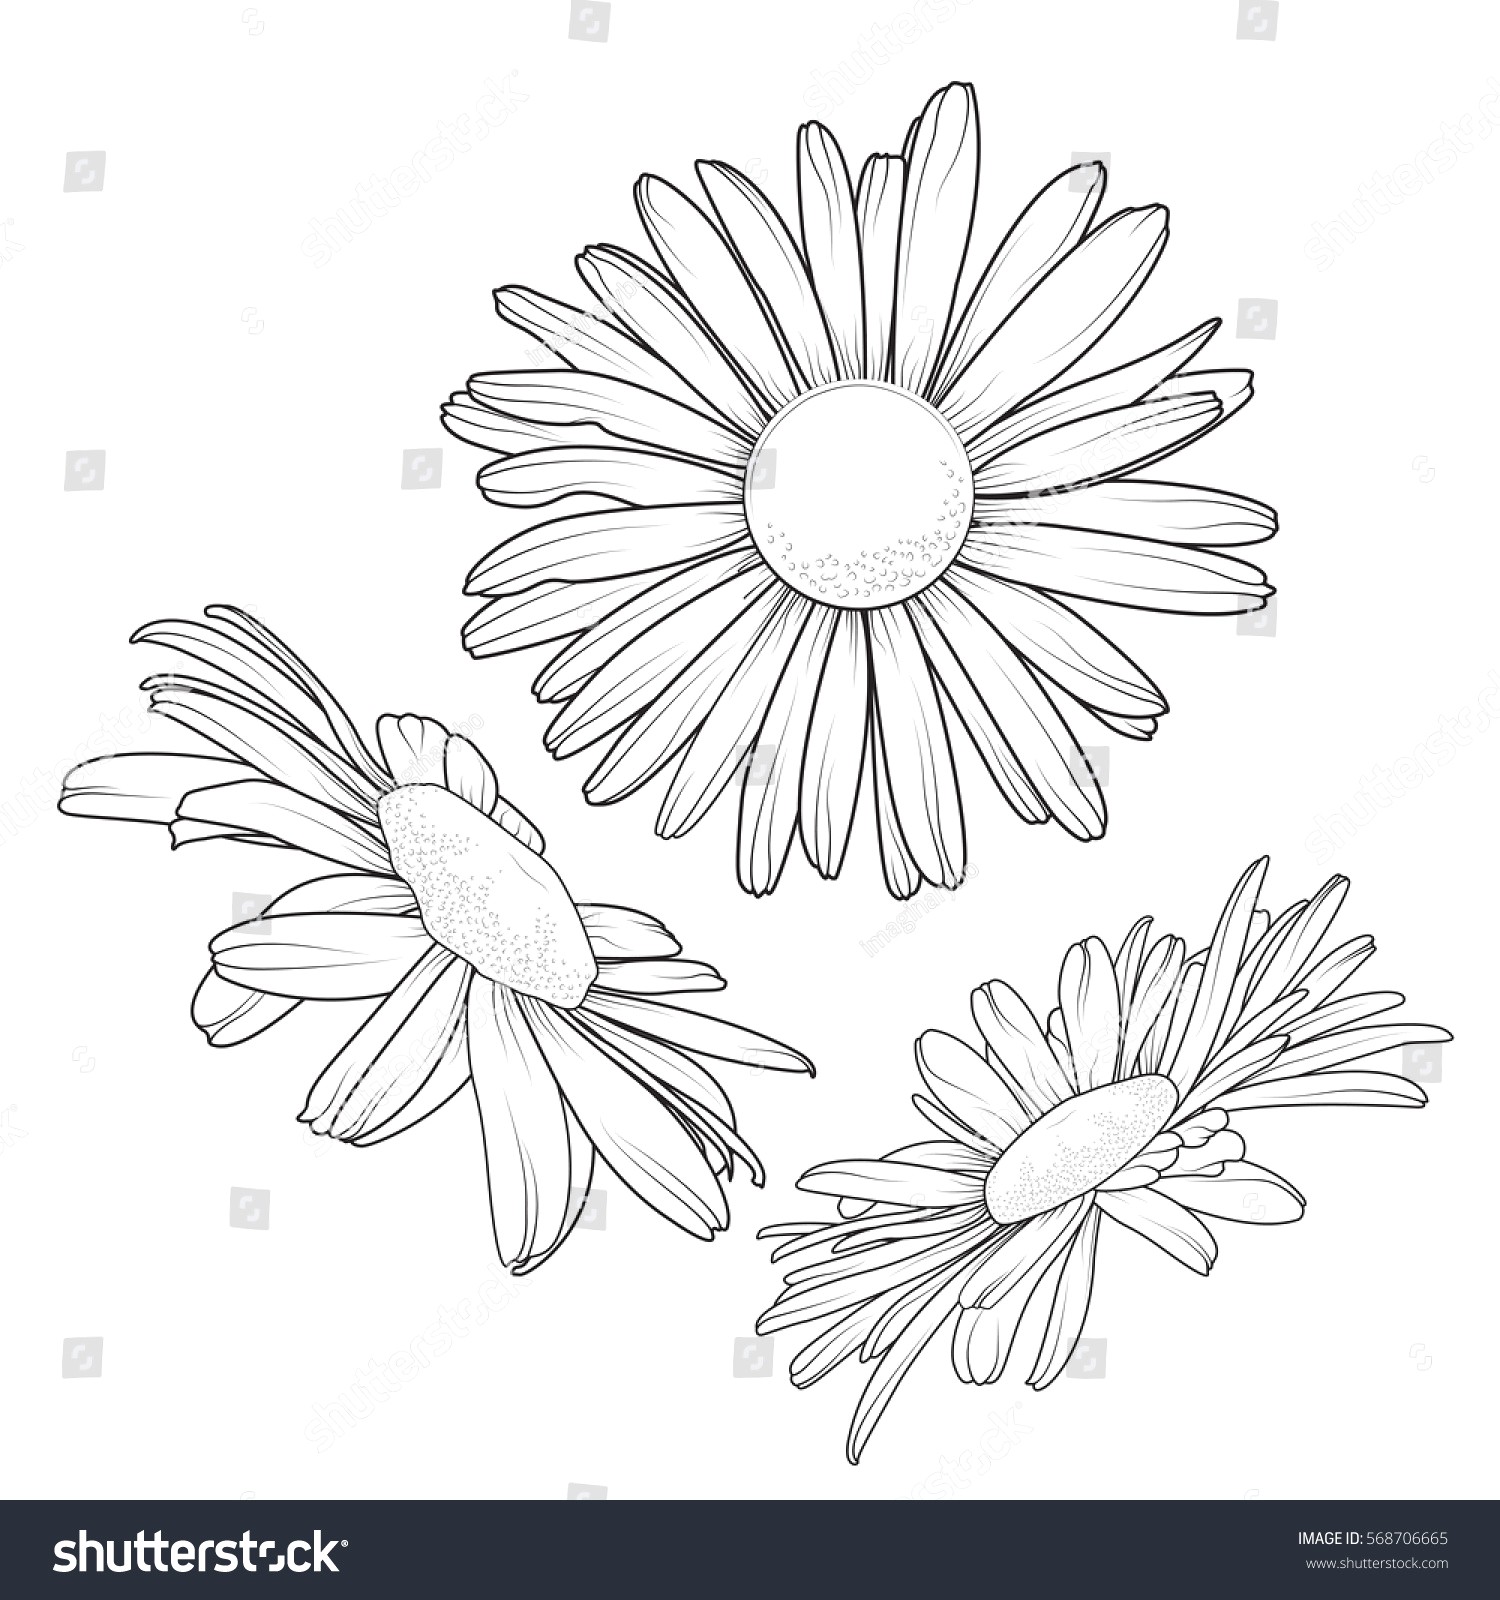 Drawing Of A Daisy Flower Sketch Library Throughout Outline - Daisy Drawing Outli...